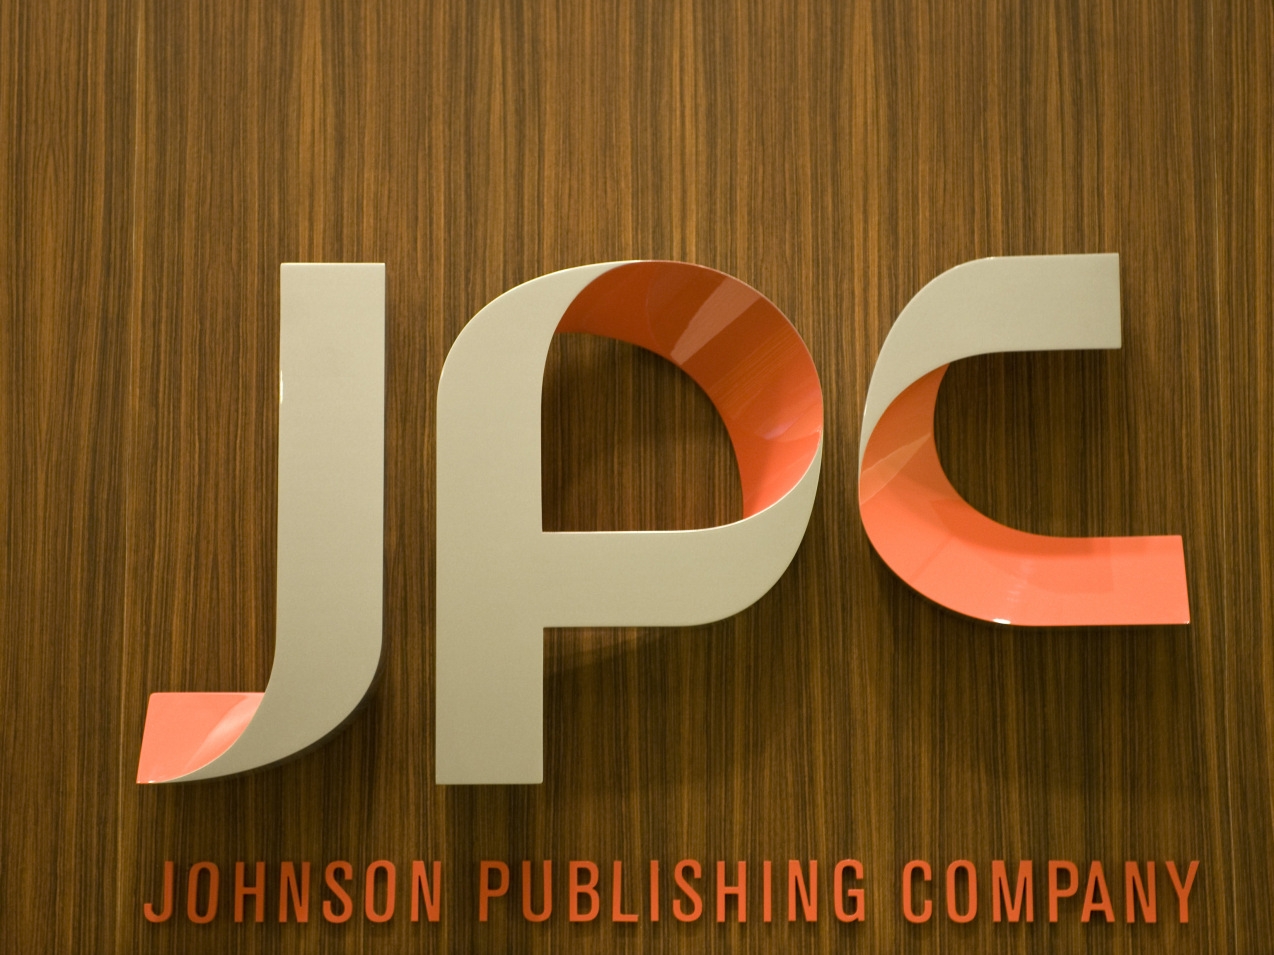 Johnson Publishing Co., the ex-publisher of Ebony and Jet, files for bankruptcy